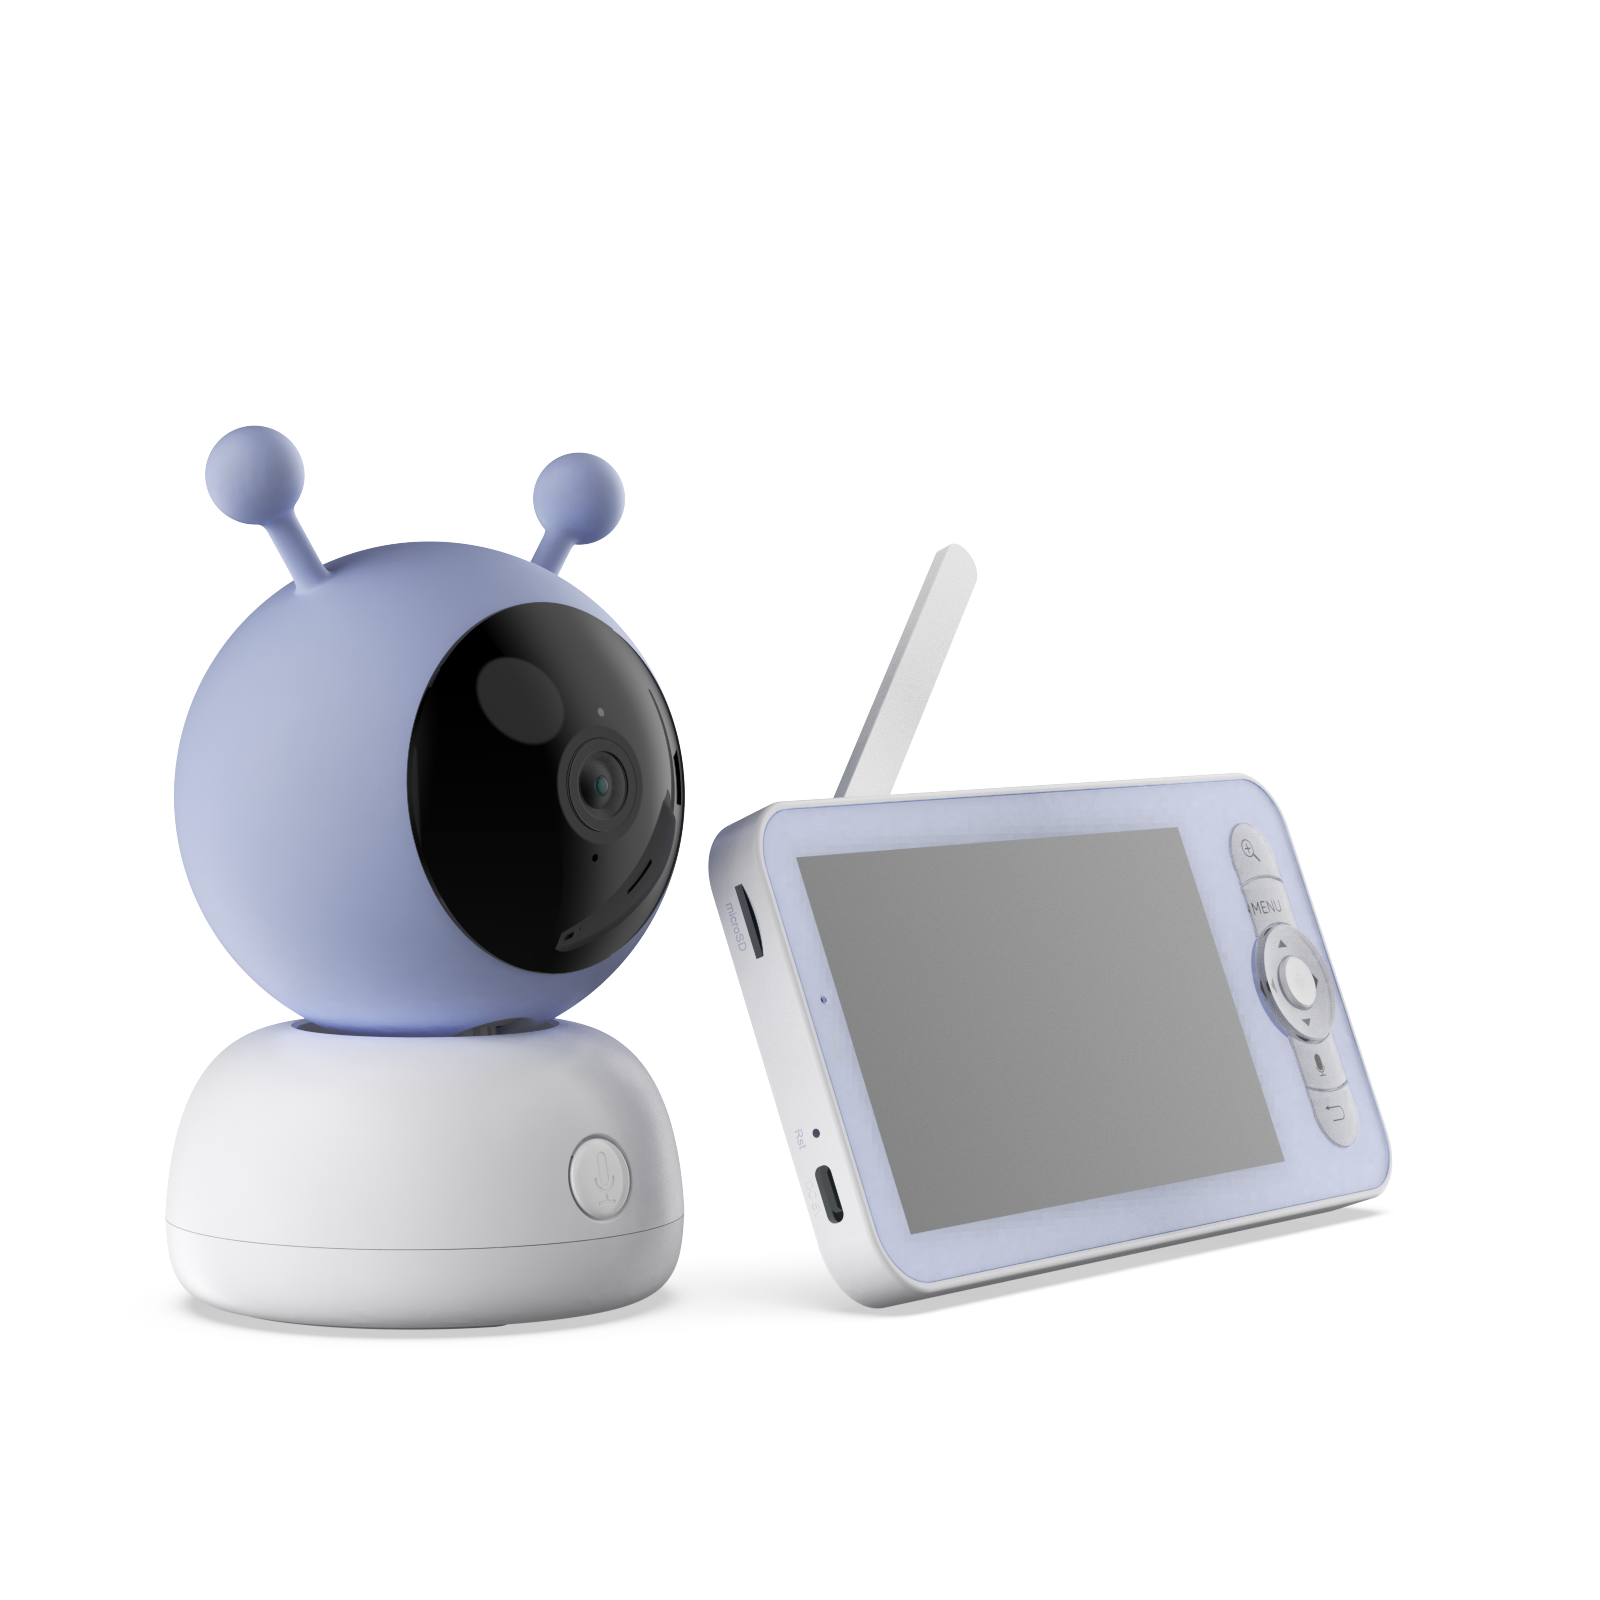 BOIFUN Smart Wifi Video Baby Monitor 5 Inch with Camera 1080P PTZ 355°,  Motion and Noise Detection Supports Mobile App Control in Pakistan for Rs.  25999.00